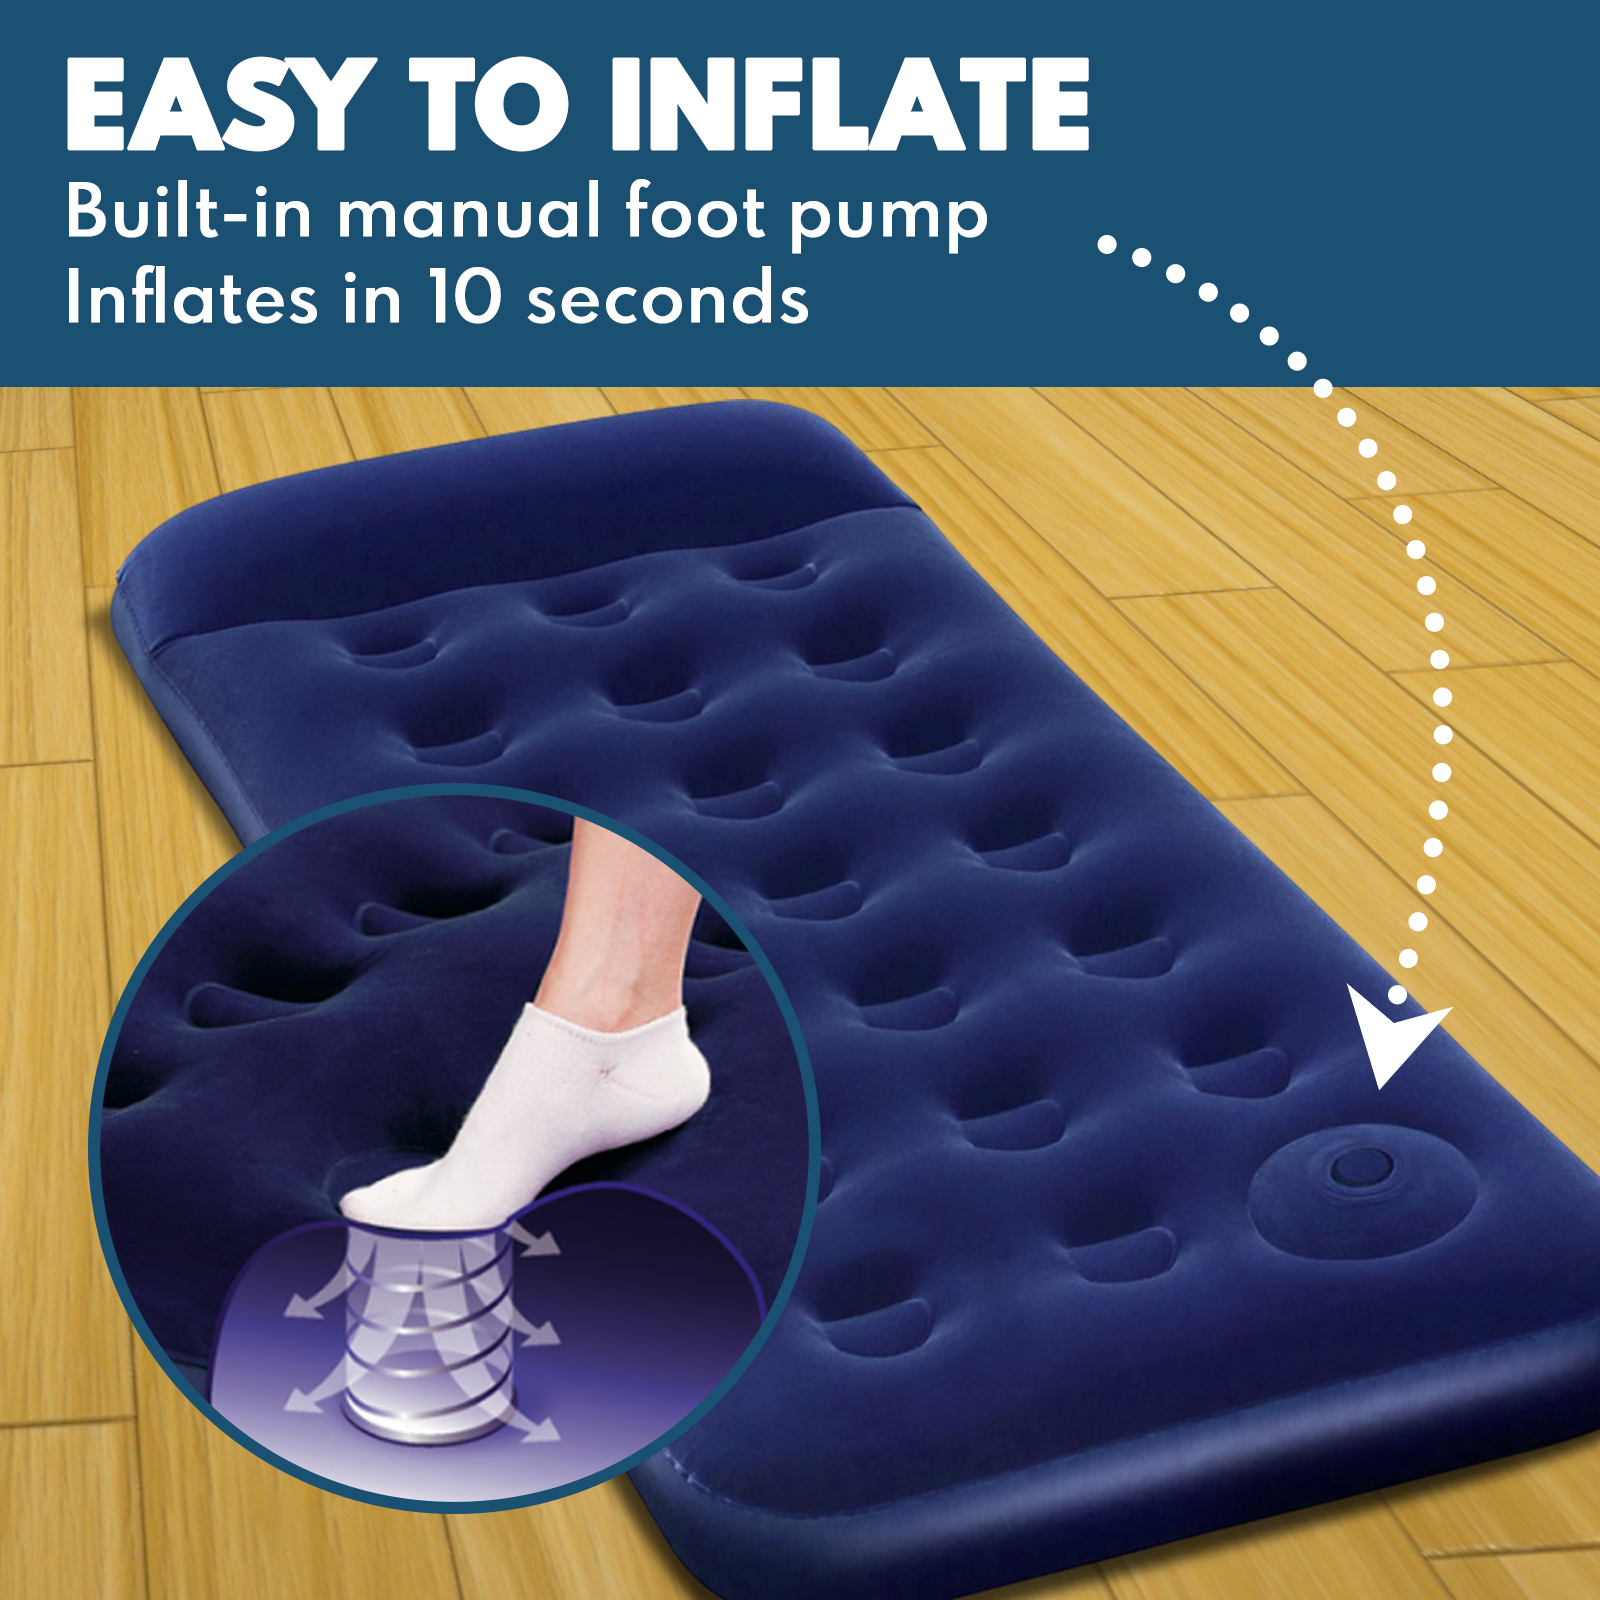 Single Size Inflatable Air Bed Mattress 22CM Built-in Foot Pump - Navy